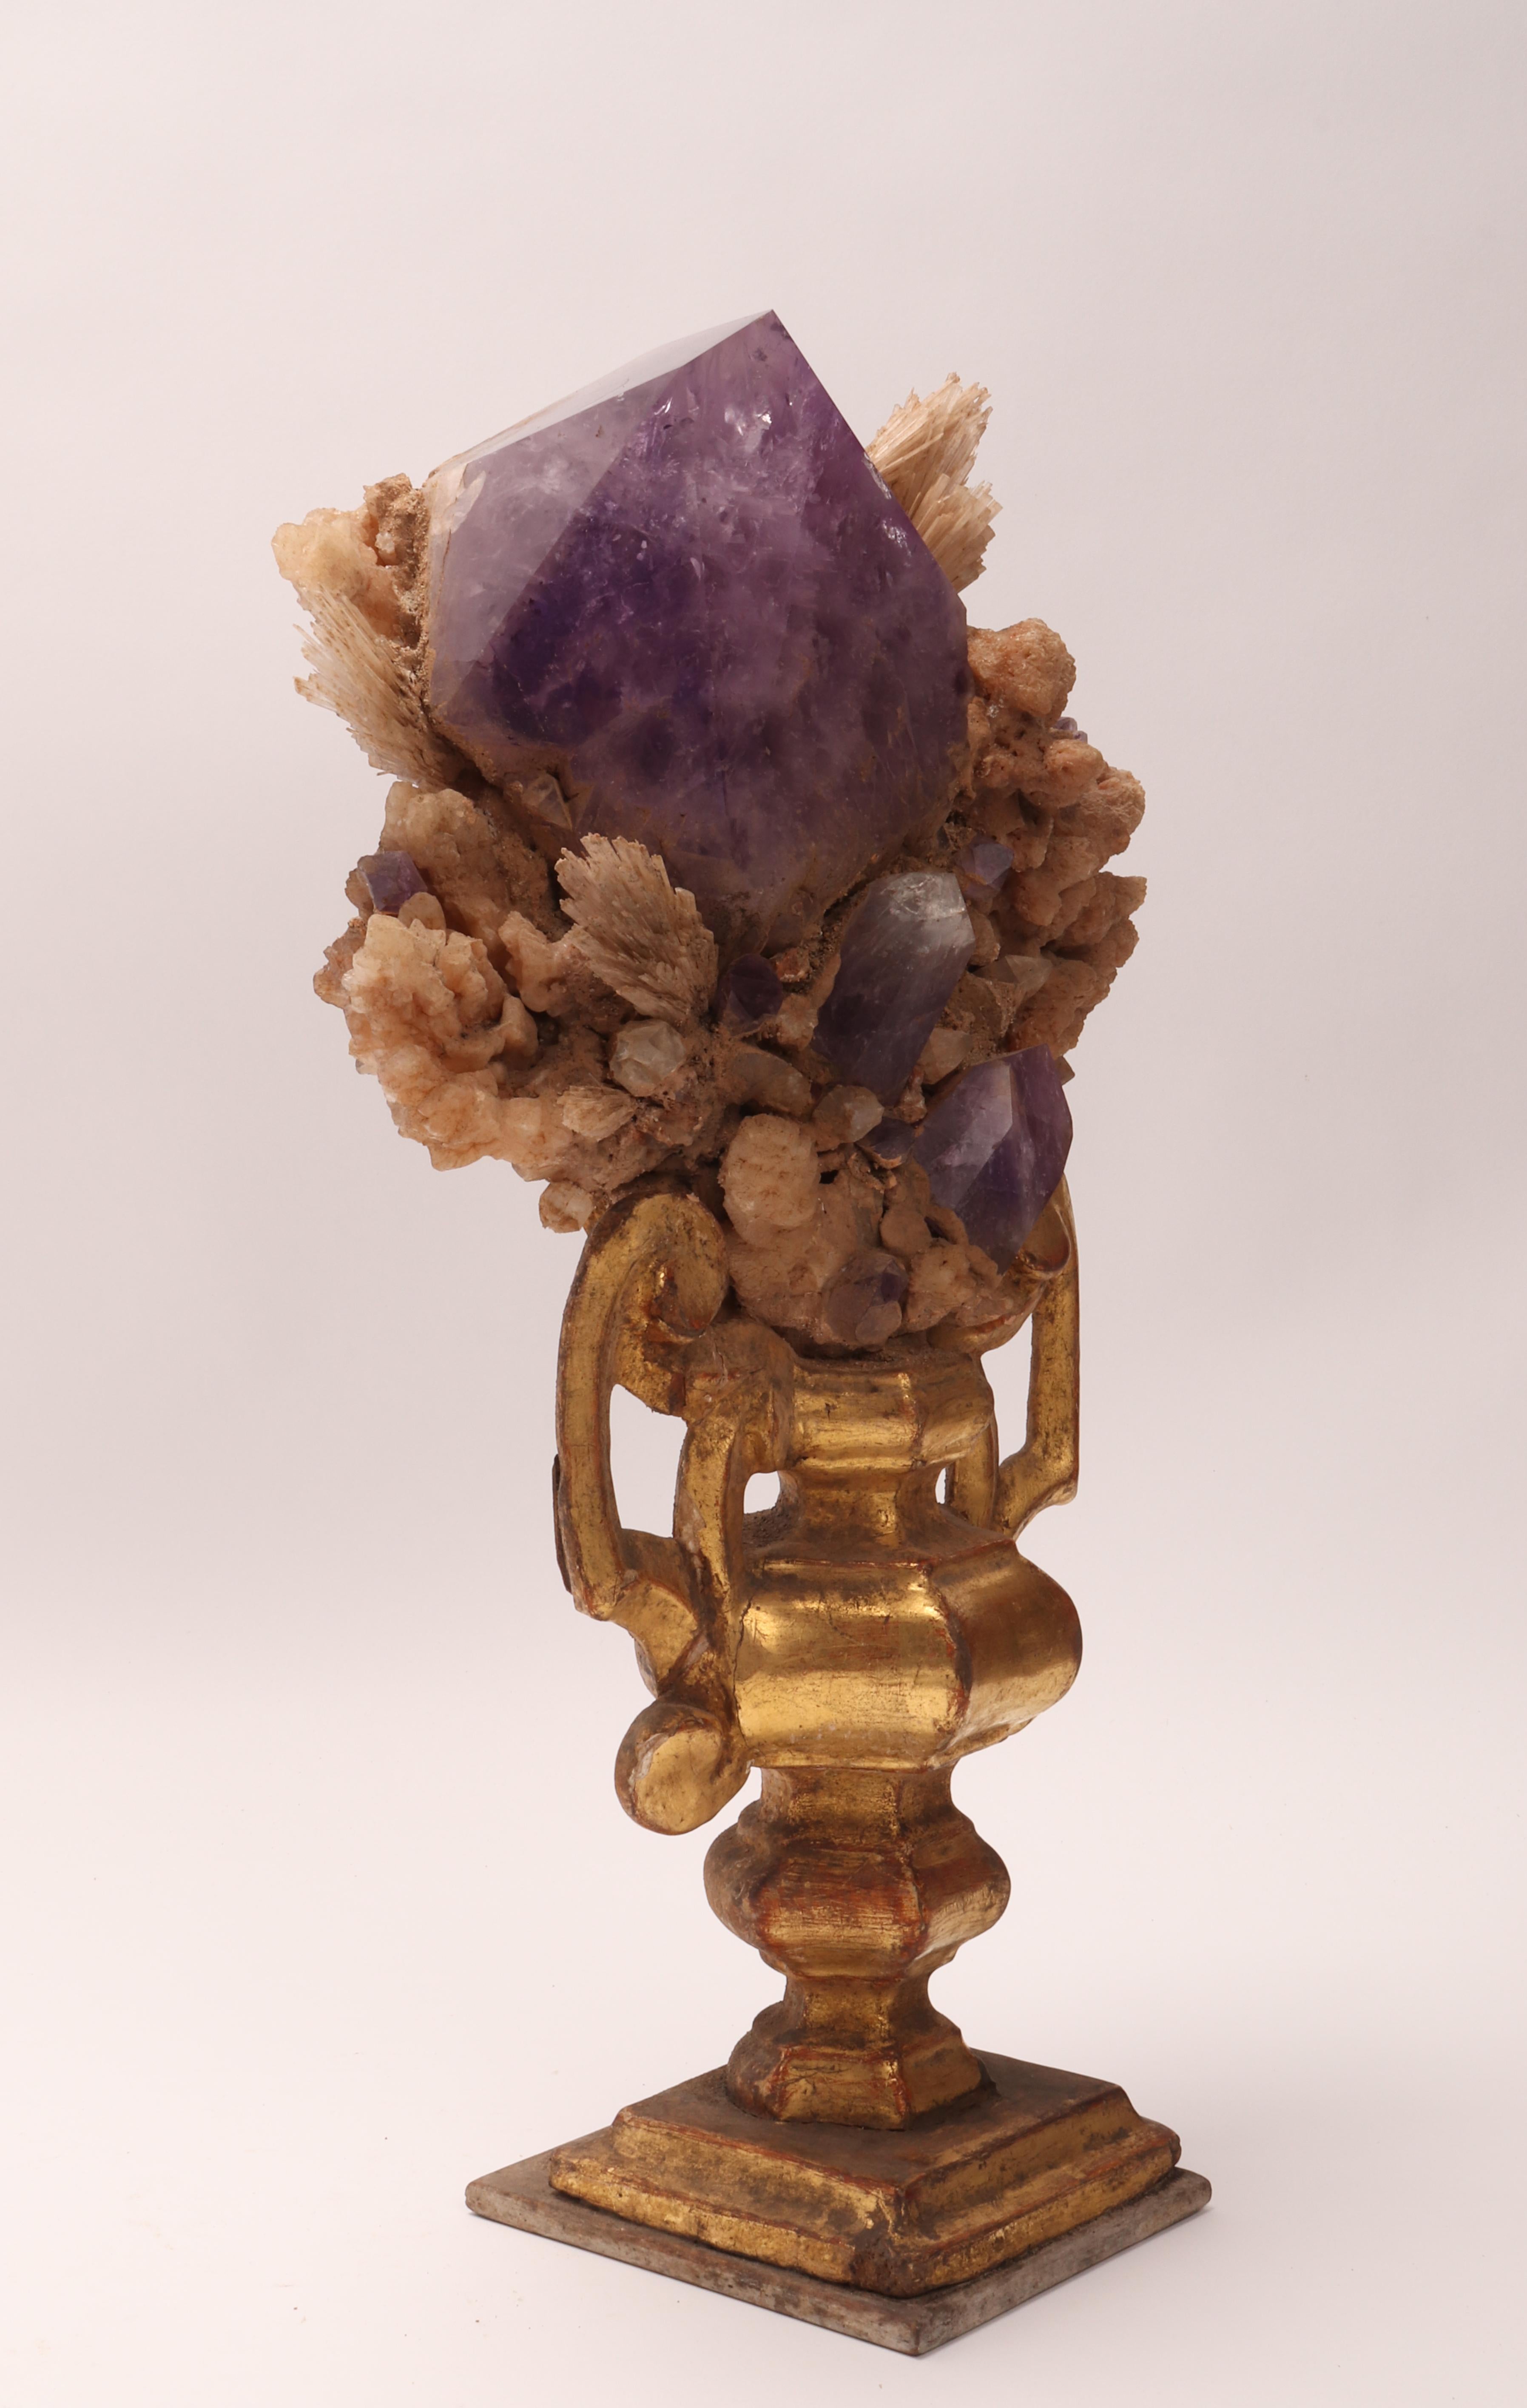 Stone Natural Specimen Amethyst and Calcite Flowers Crystals, Italy, 1880 For Sale